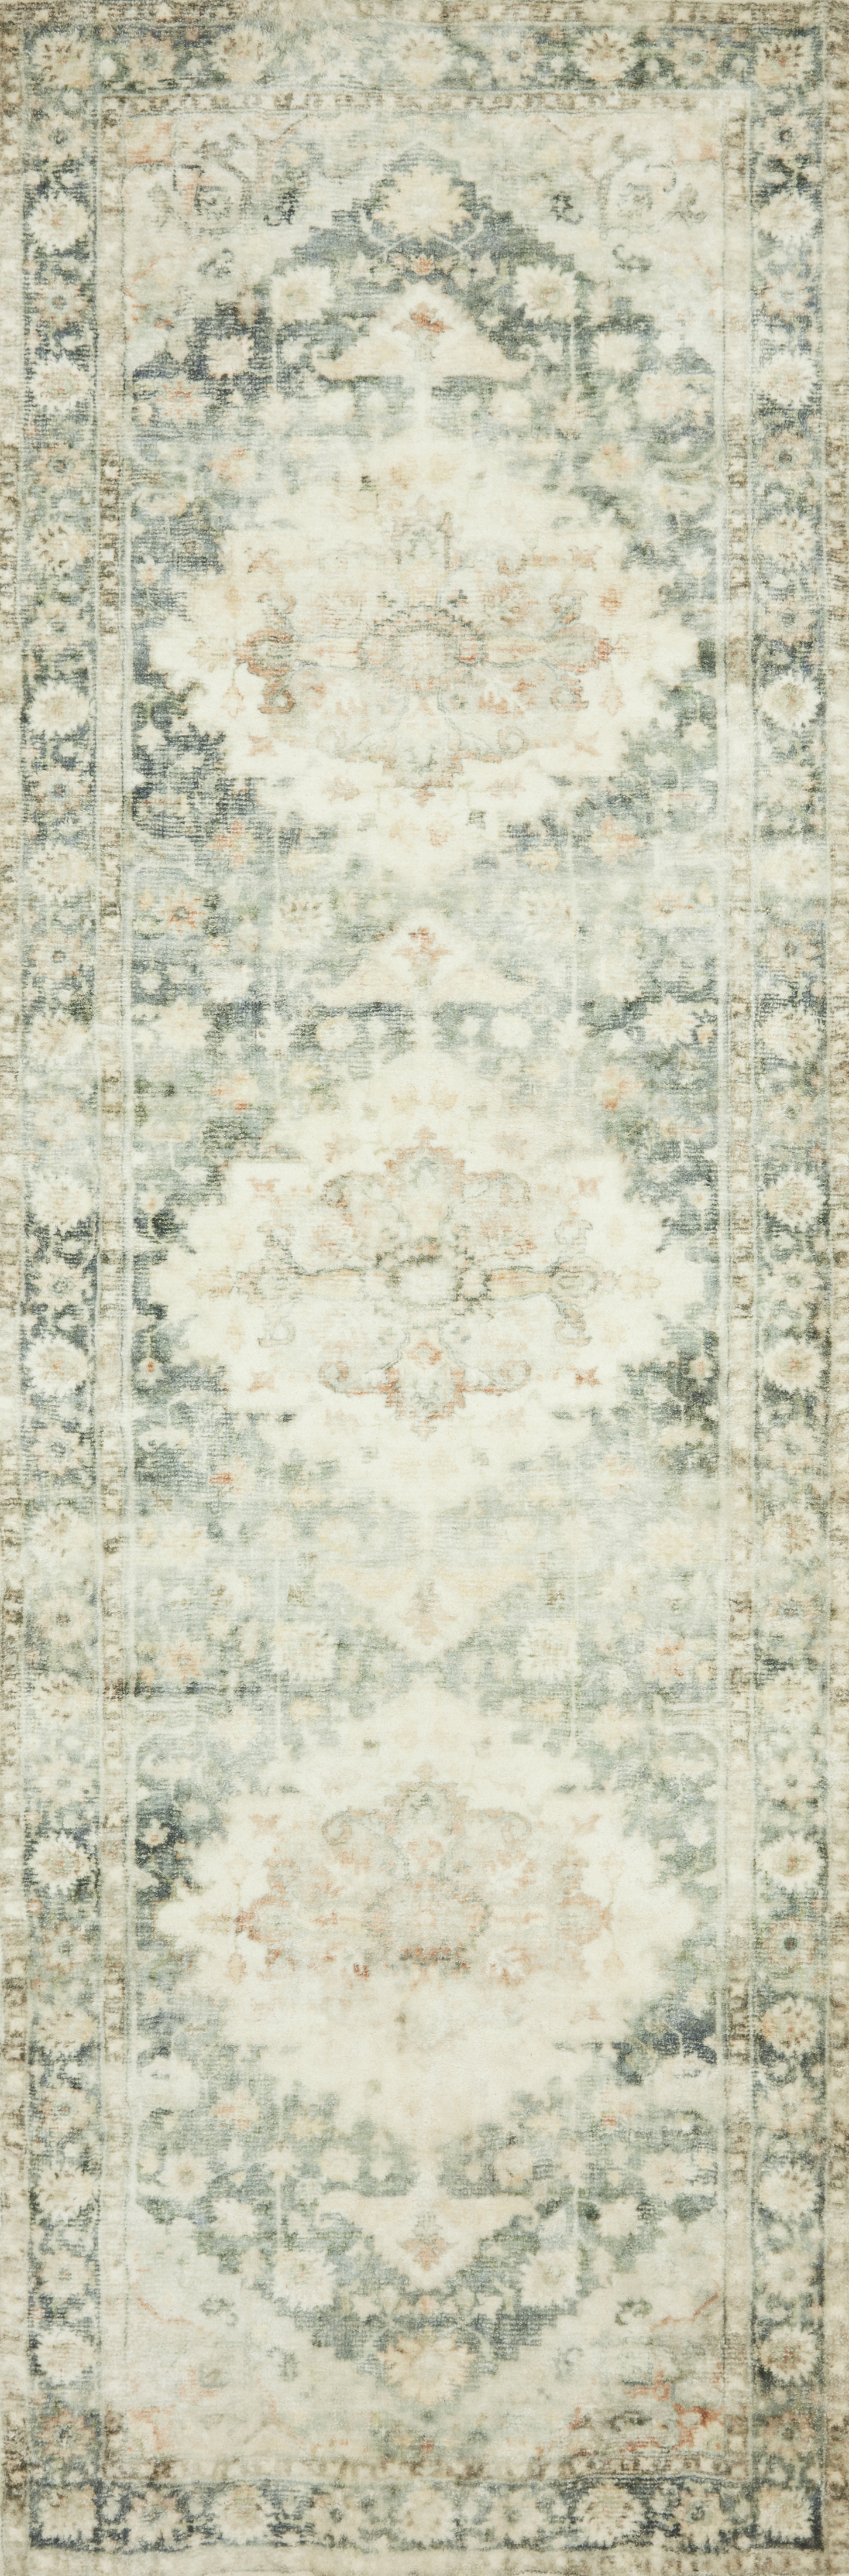 Rosette ROS-08 Teal / Ivory 3'-3" x 5'-3" - Image 2